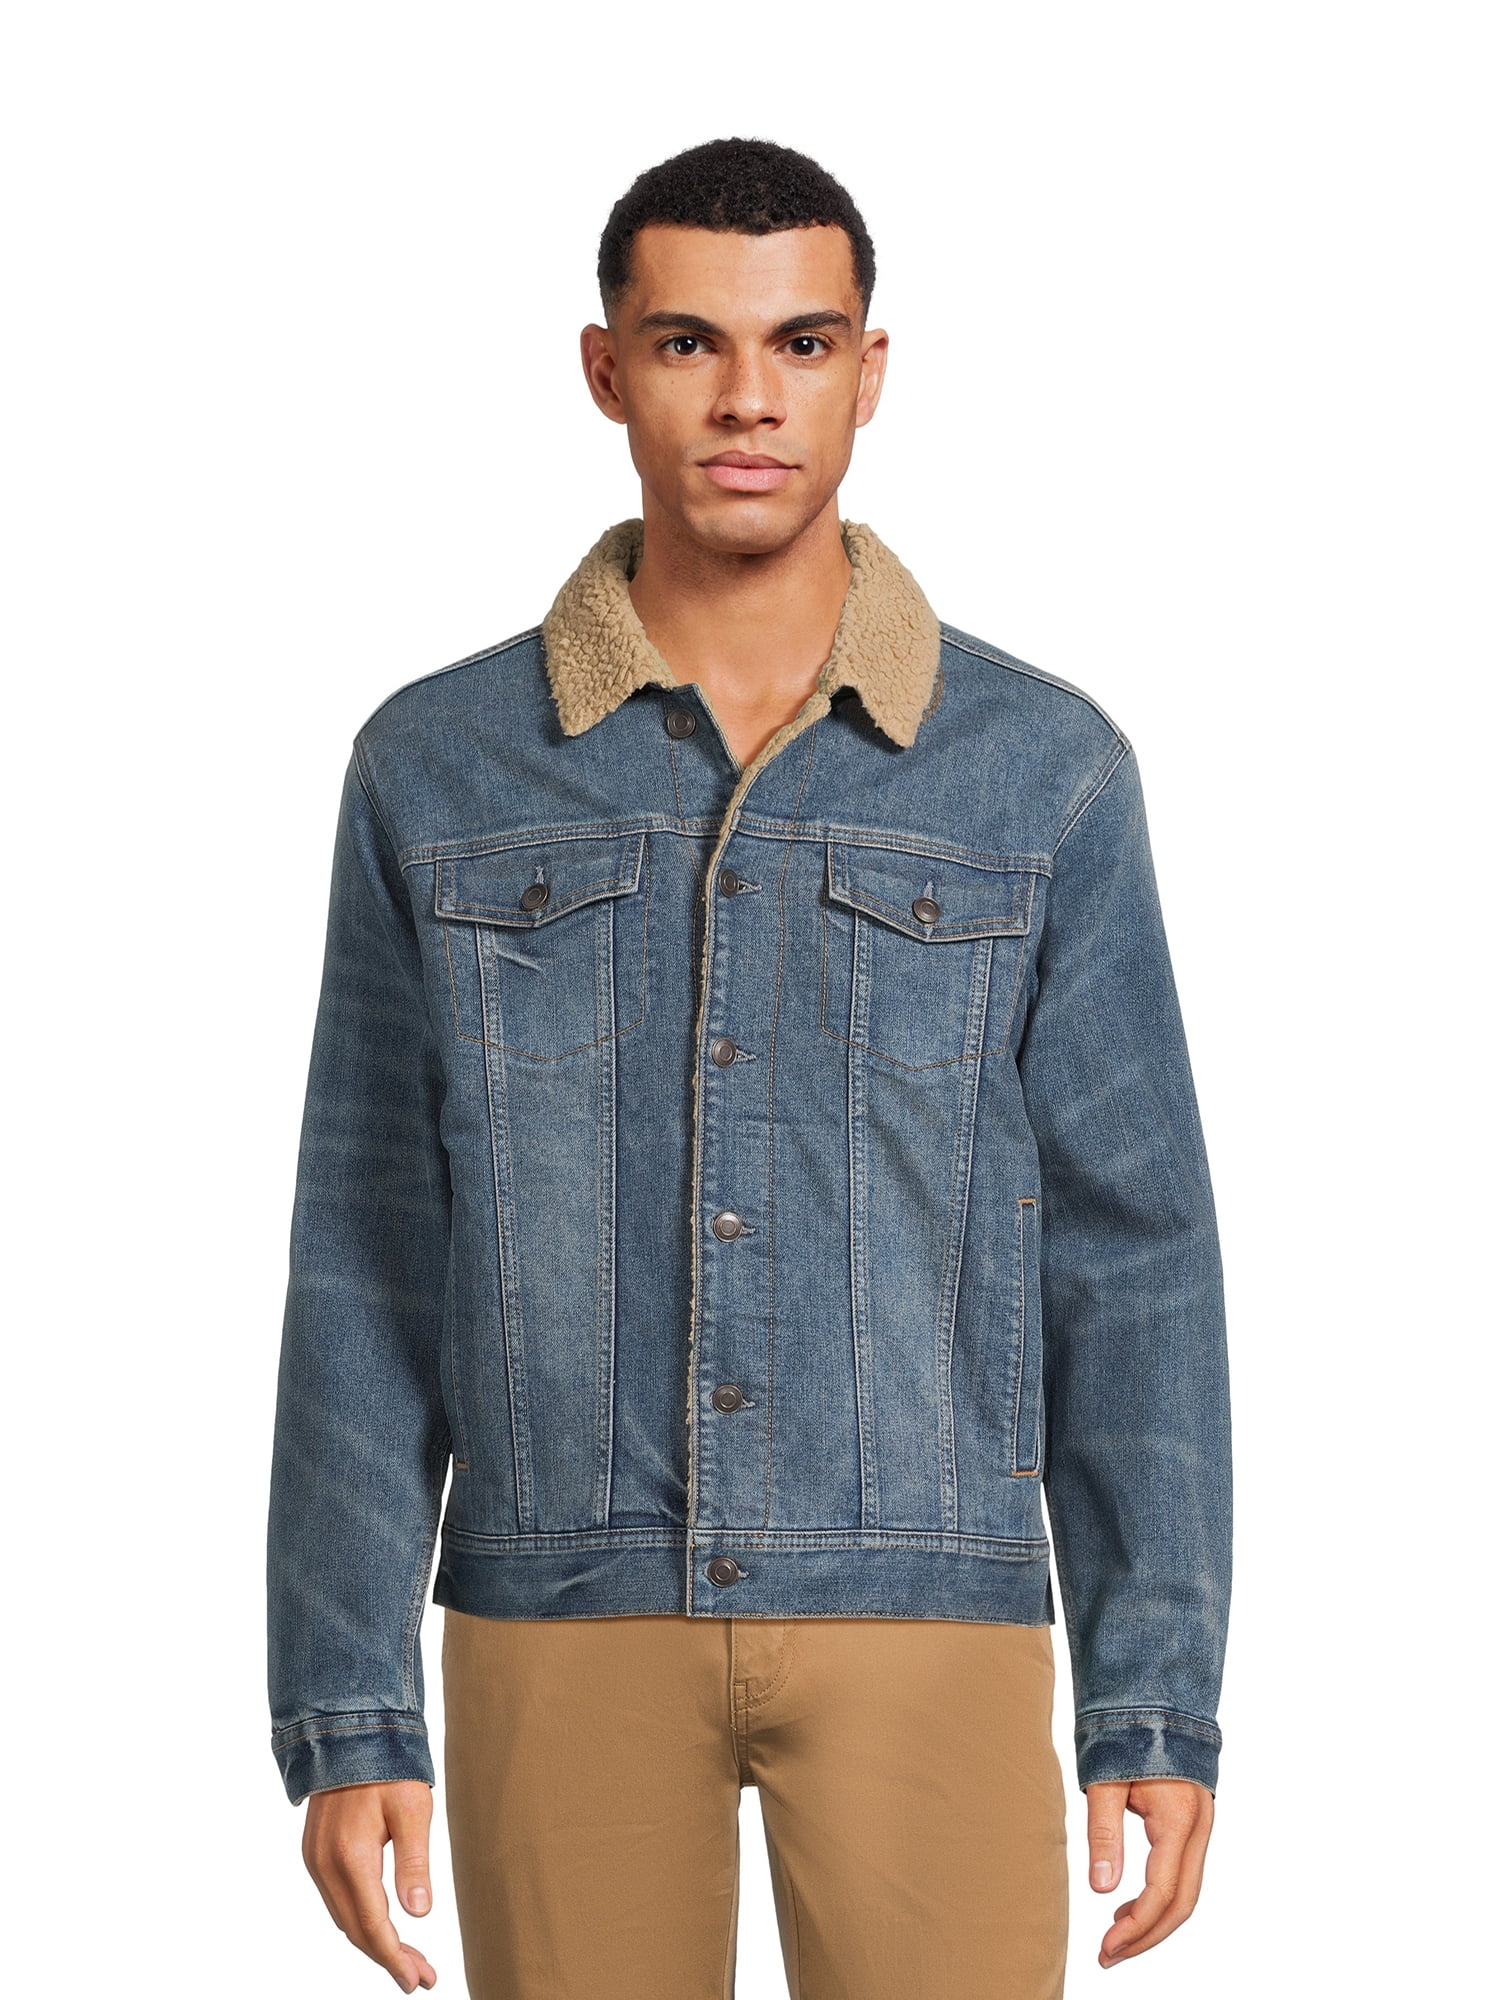 George Men's Denim Jacket with Faux Sherpa Lining, Sizes S-3XL ...